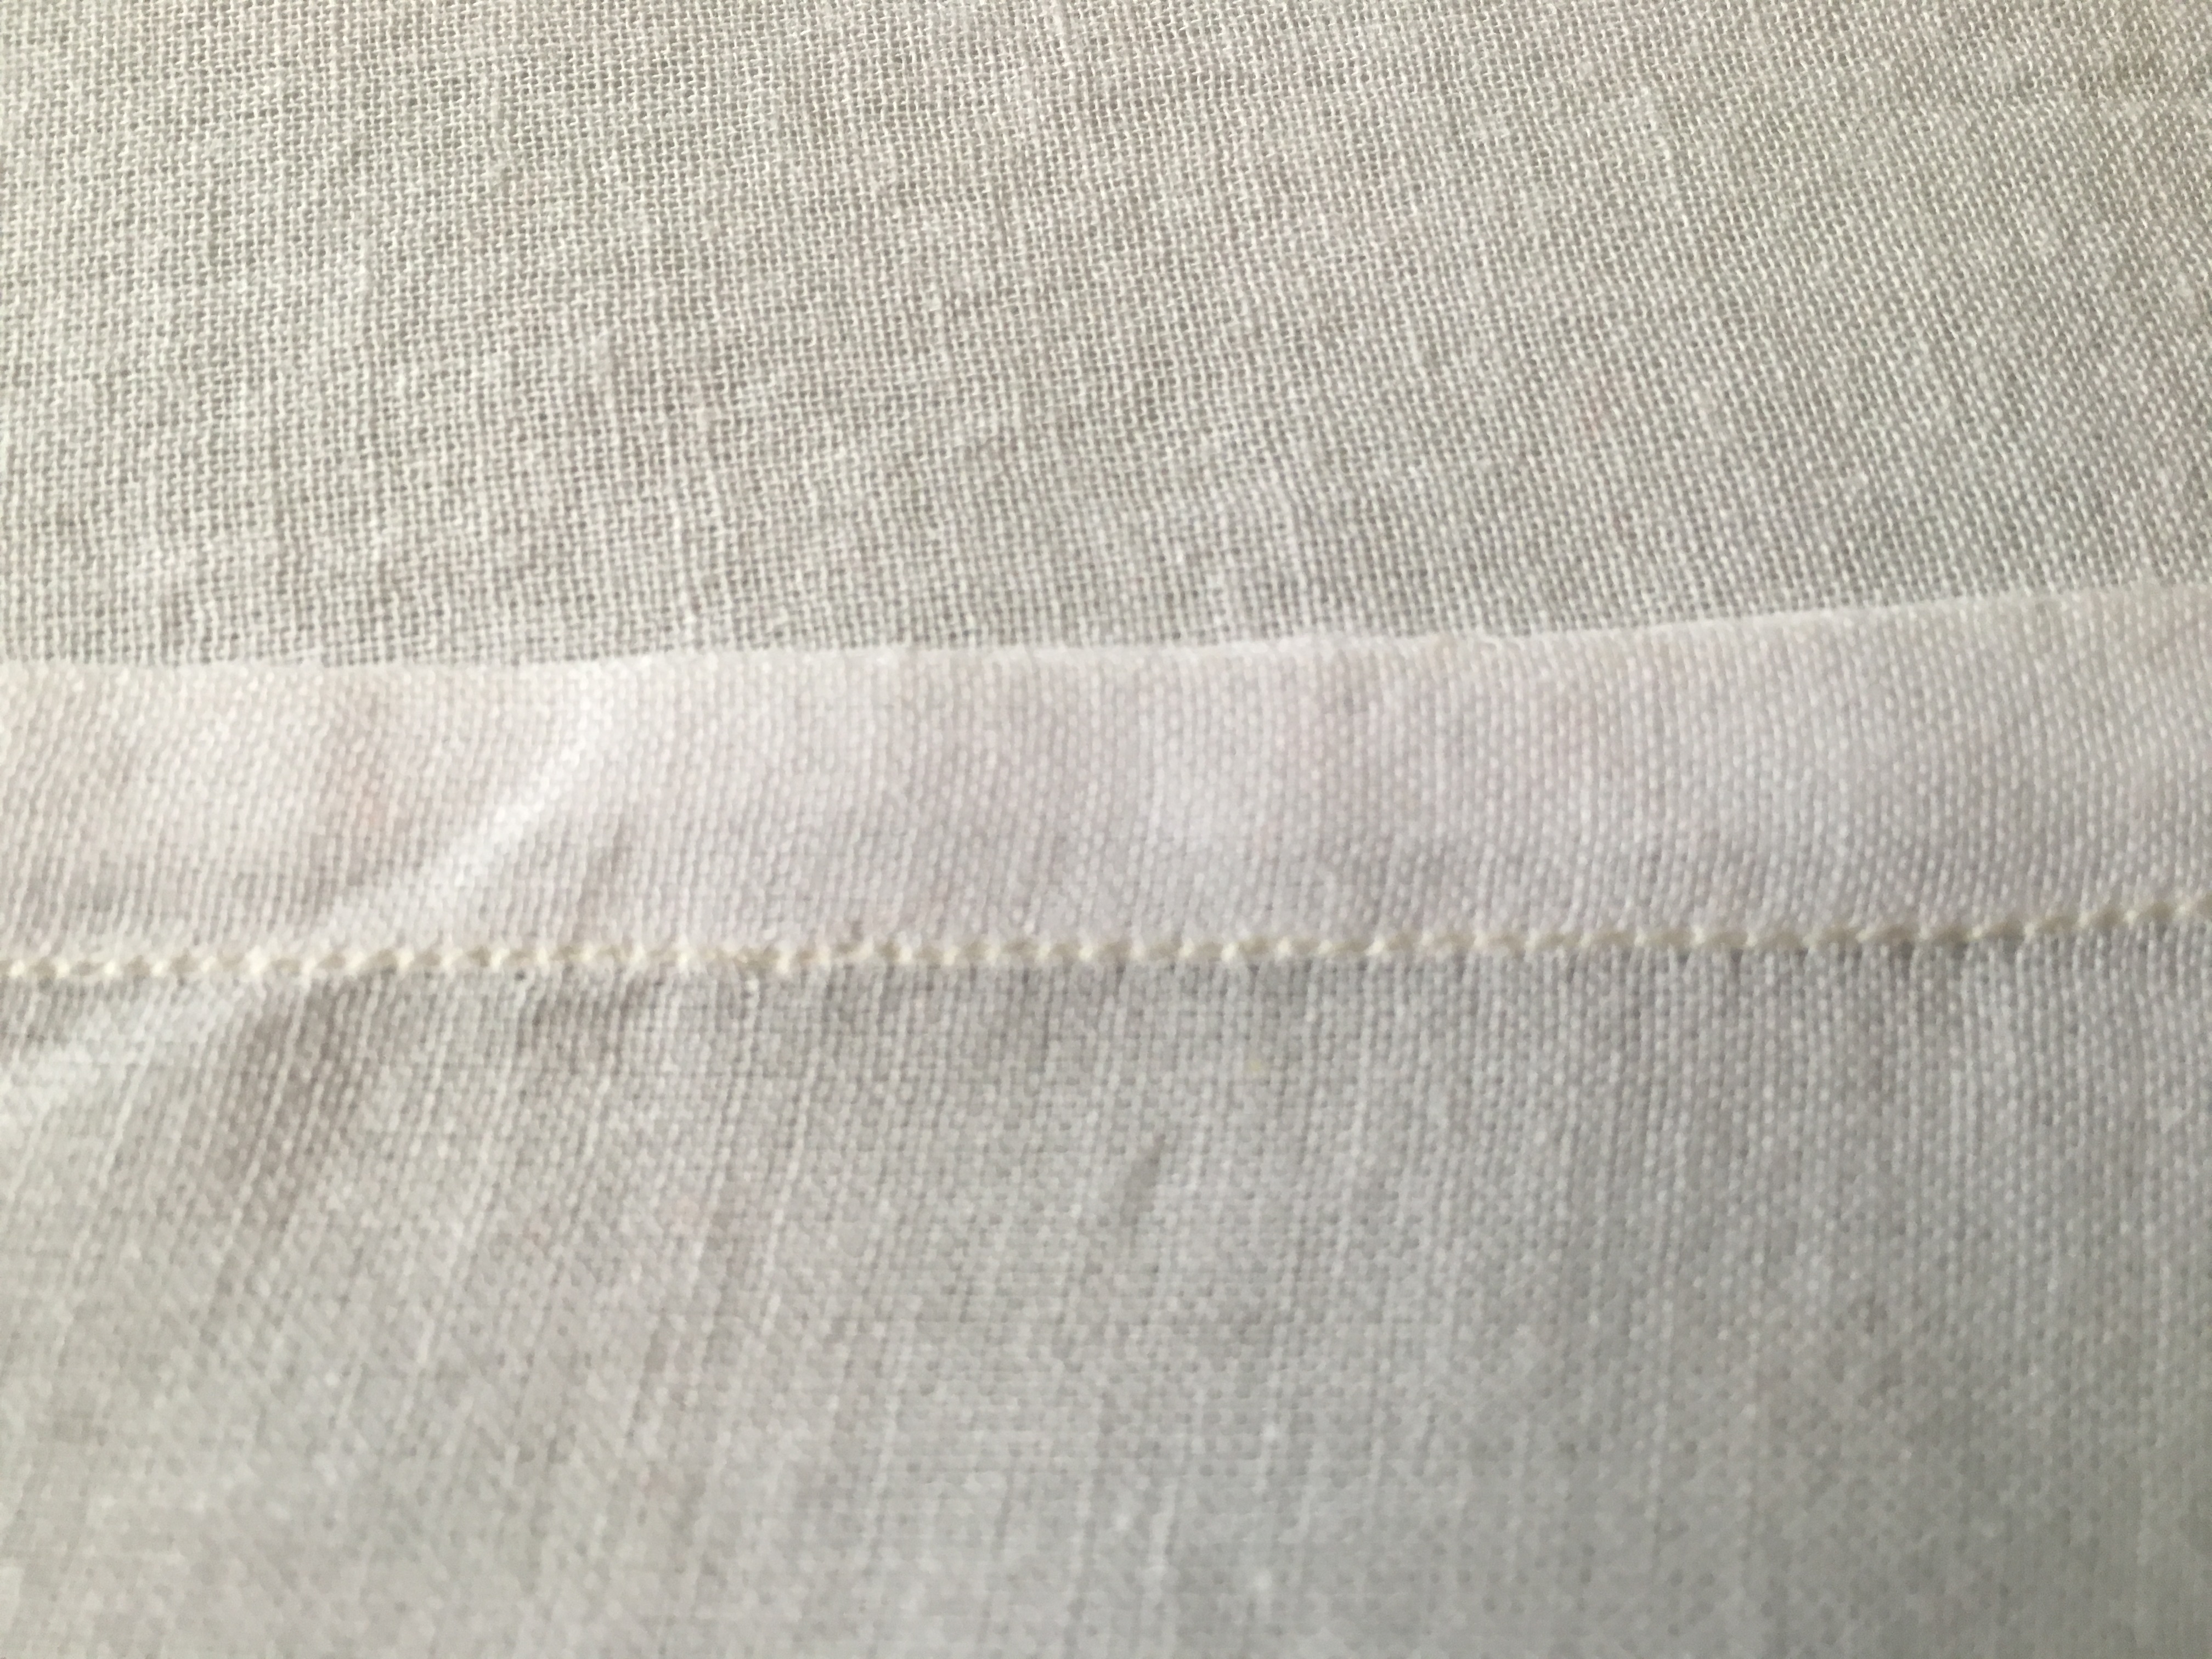 Making french seams the quick and lazy way